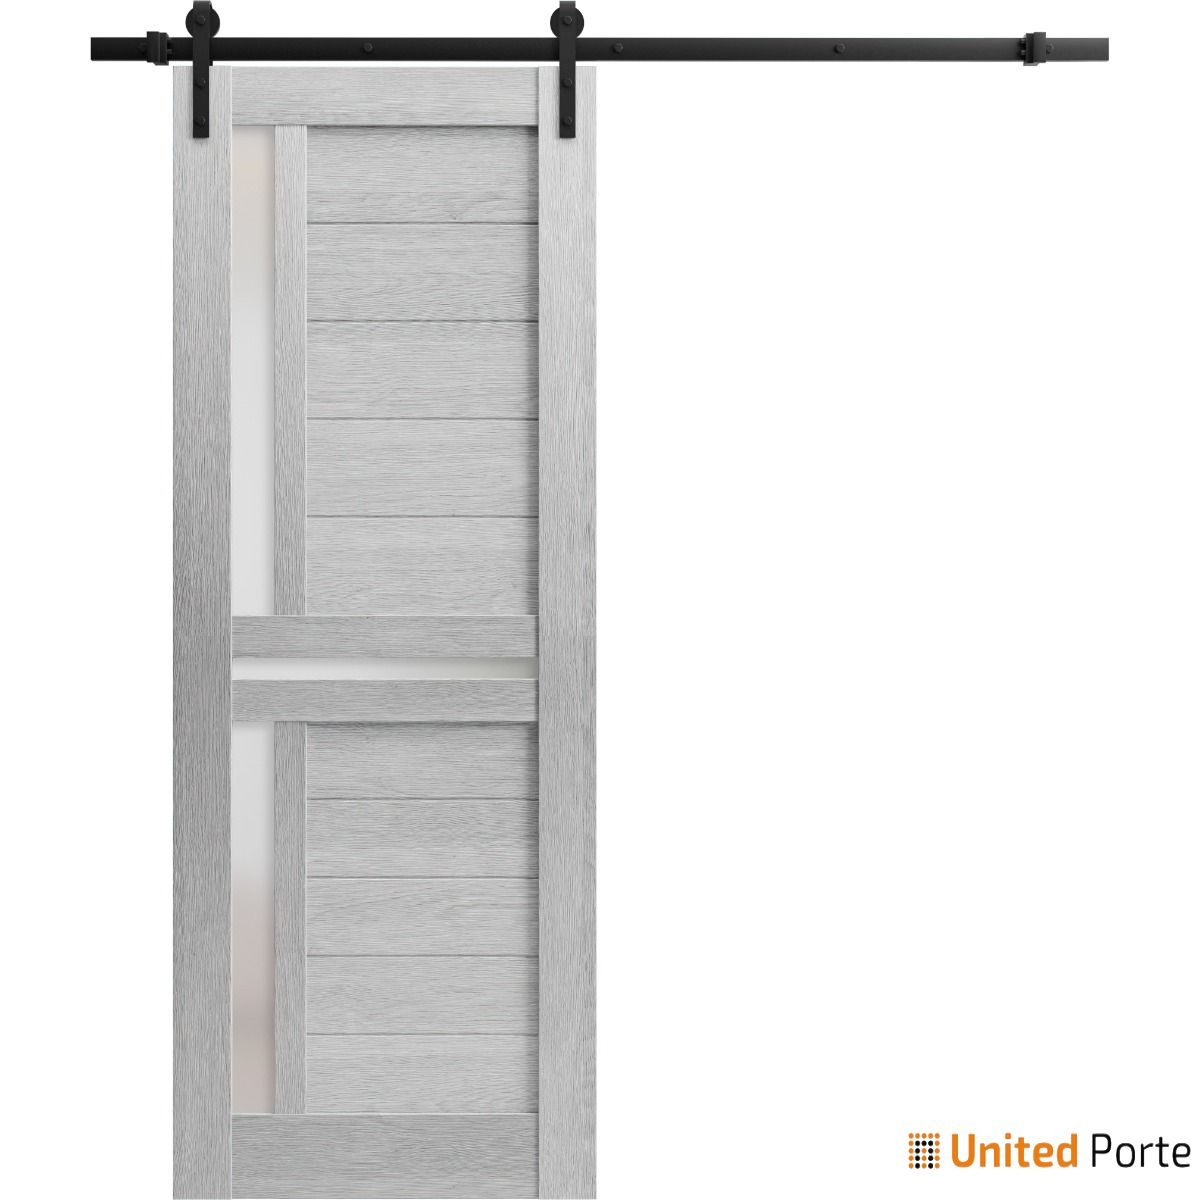 Veregio 7288 Light Grey Oak Barn Door with Frosted Glass and Black Rail